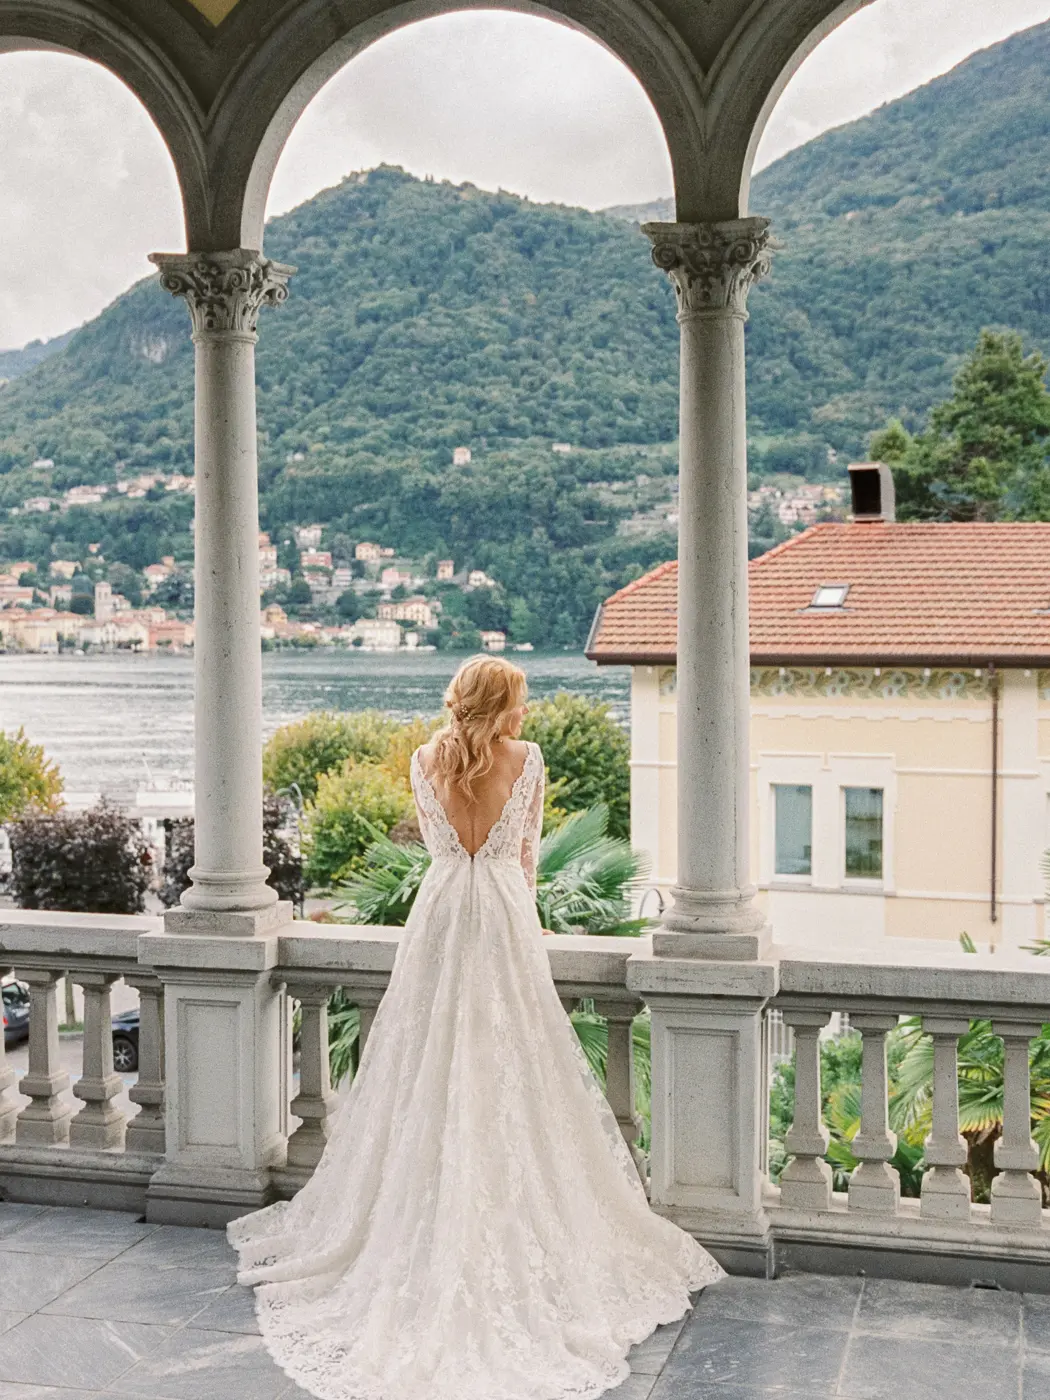 Sophisticated wedding day with a on stunning view from the balcony over Lake Como